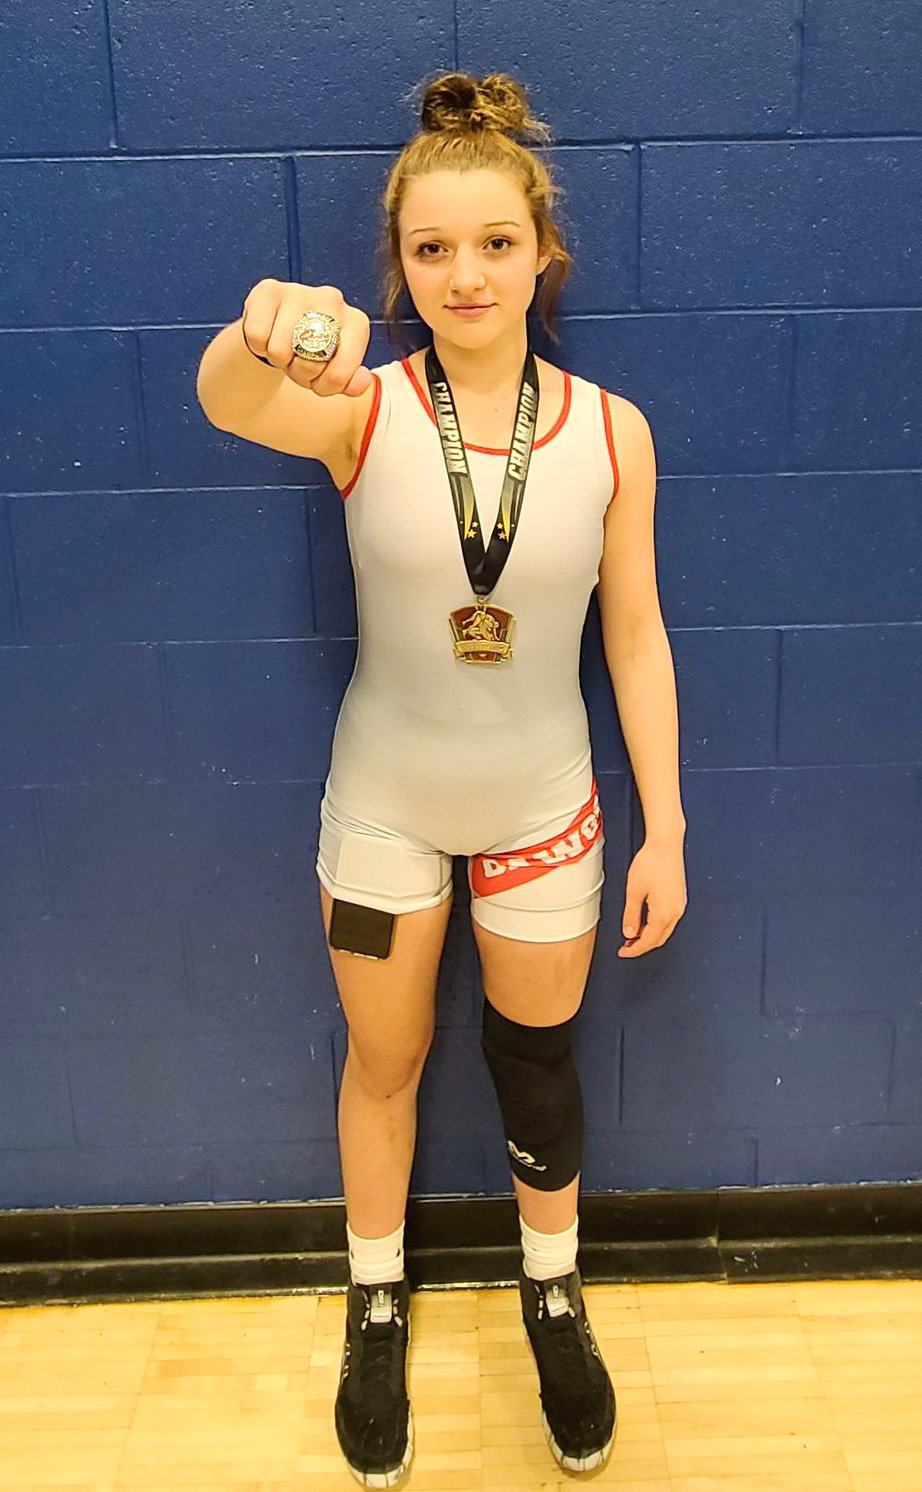 Mexico's Kaylynn Pehle finished first in her weight class June 4 at the offseason Kids of Chaos tournament in Hillsboro.